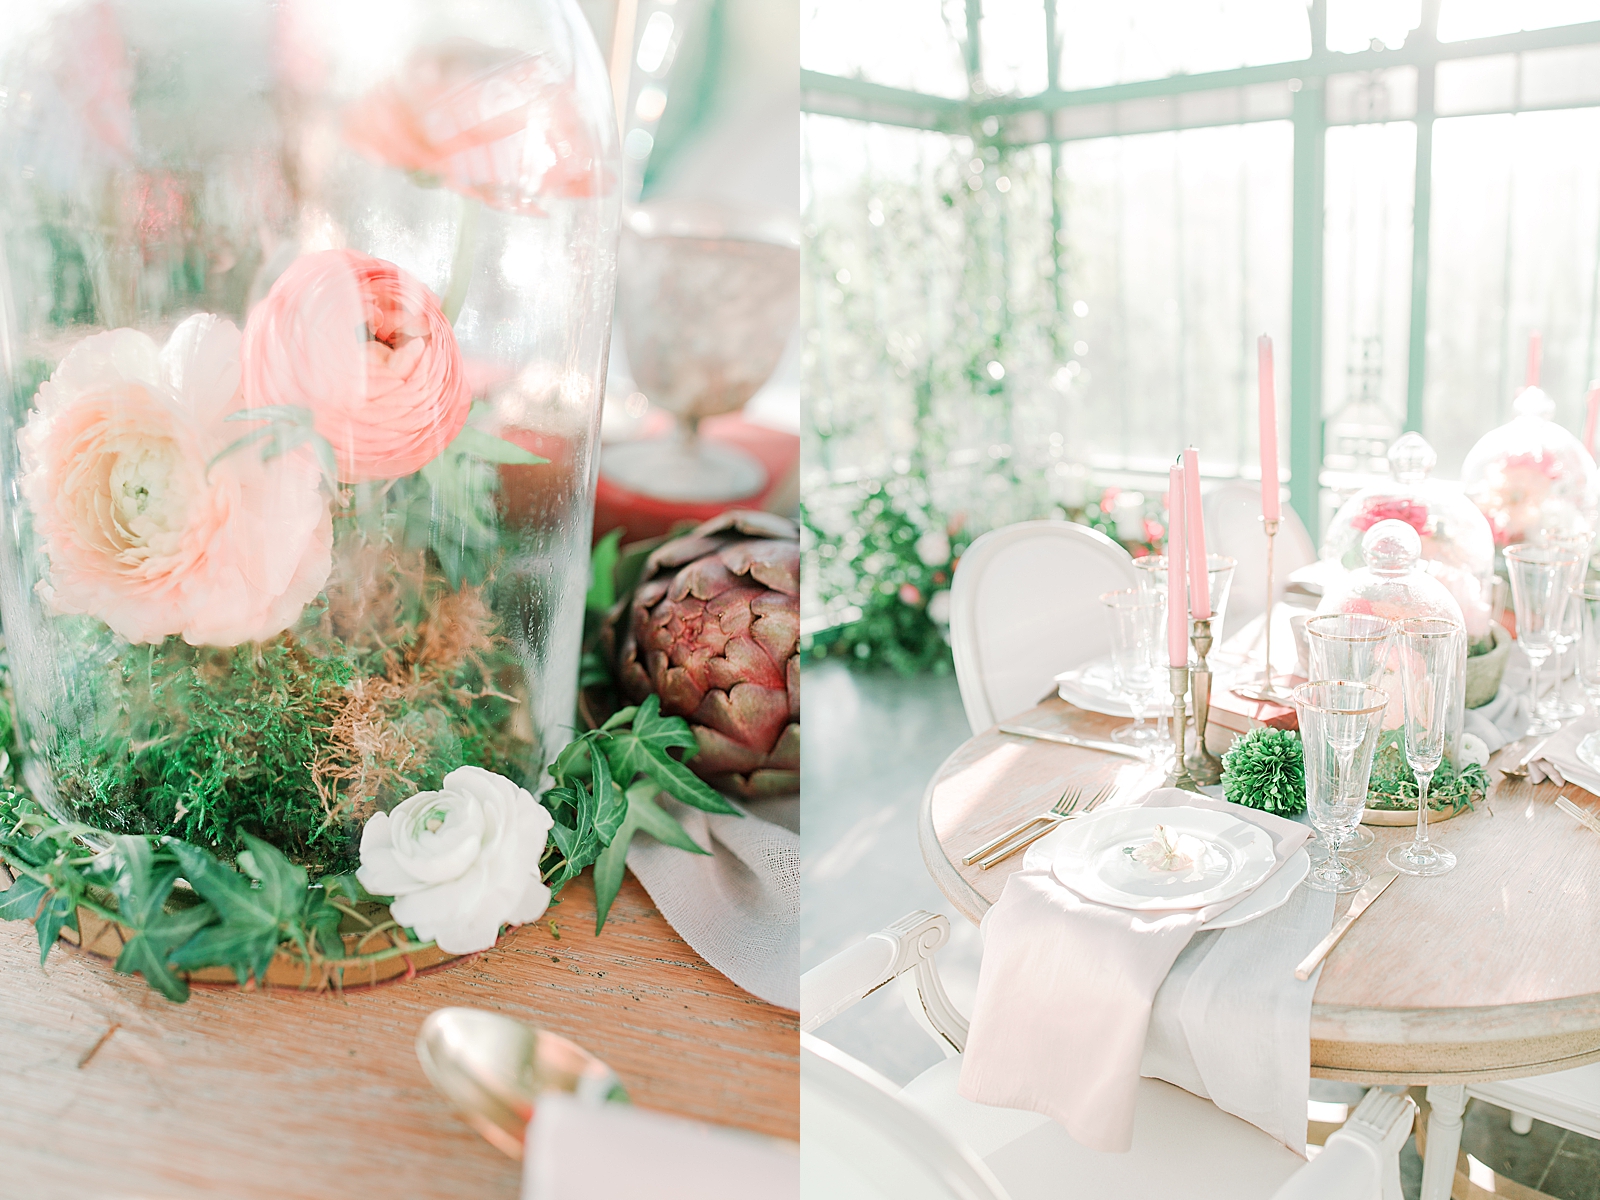 2400 On The River Wedding Reception table and and flowers in a terrarium Photos